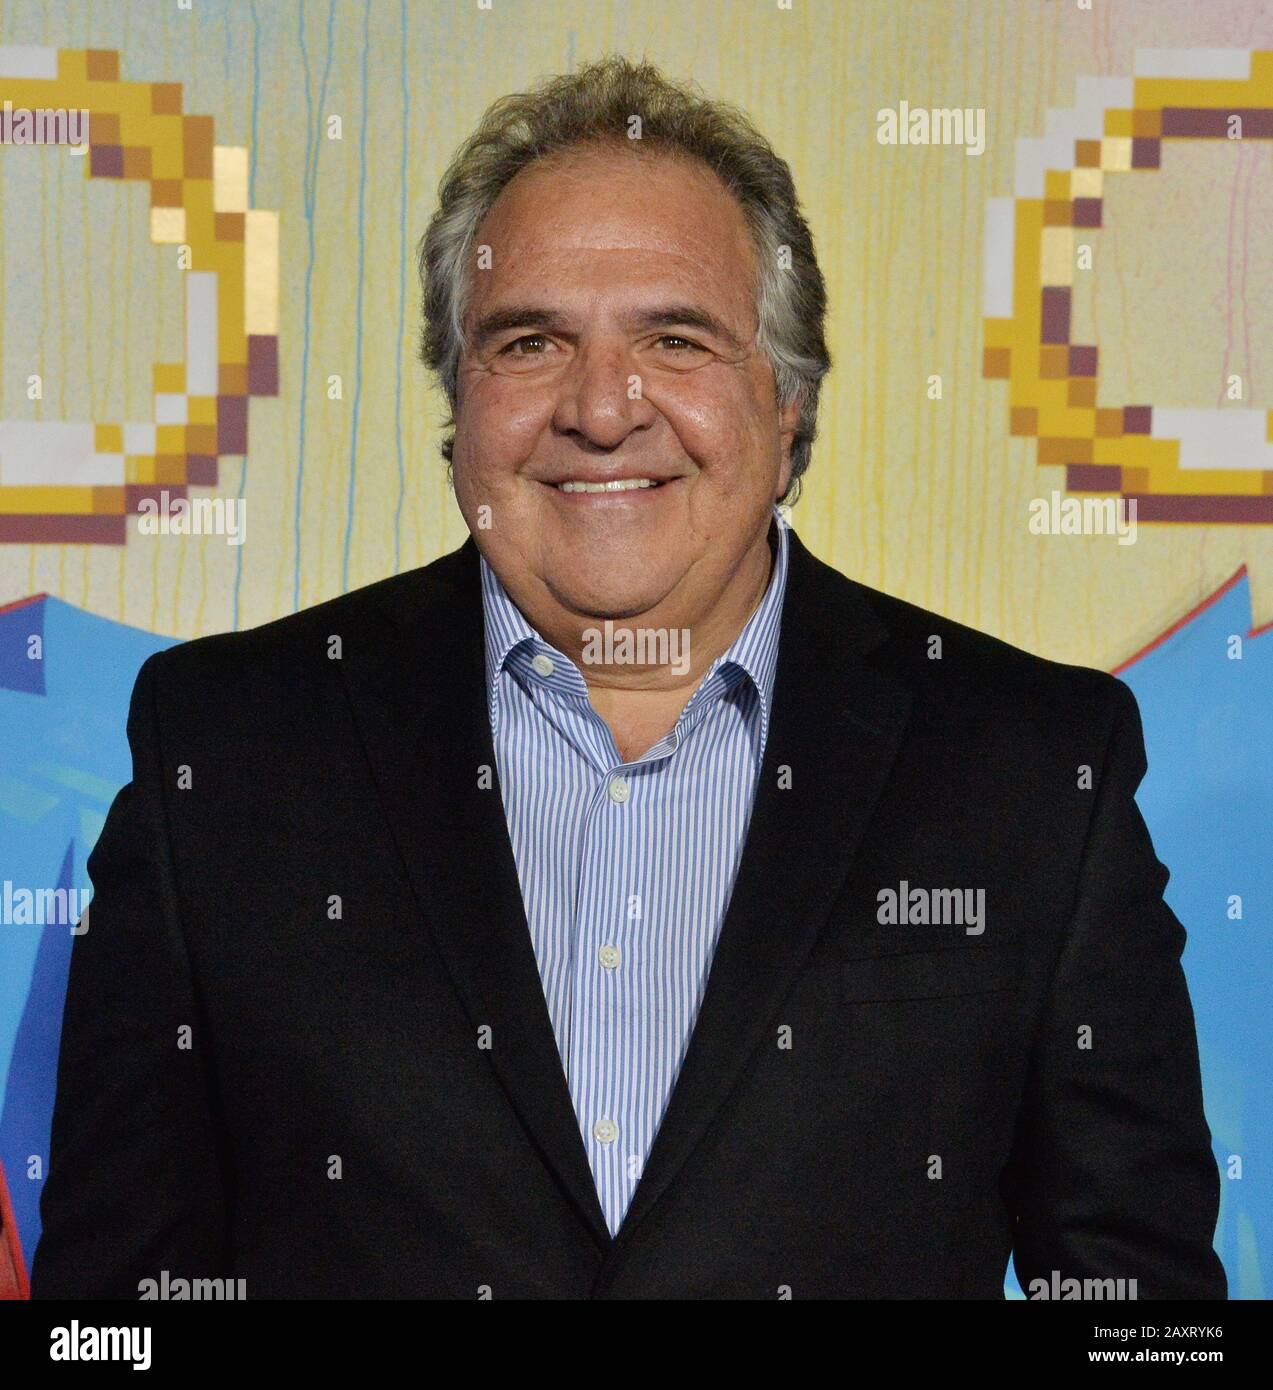 Jim Gianopulos, chairman and chief executive officer of Paramount Picture attends a special screening of the sci-fi family comedy adventure film 'Sonic the Hedgehog' at the Regency Village Theatre in the Westwood section of Los Angeles on Wednesday, February 12, 2020. Storyline: Based on the global blockbuster videogame franchise from Sega, 'Sonic' tells the story of the world's speediest hedgehog as he embraces his new home on Earth. In this live-action adventure comedy, Sonic and his new best friend Tom (James Marsden) team up to defend the planet from the evil genius Dr. Robotnik (Jim Carre Stock Photo